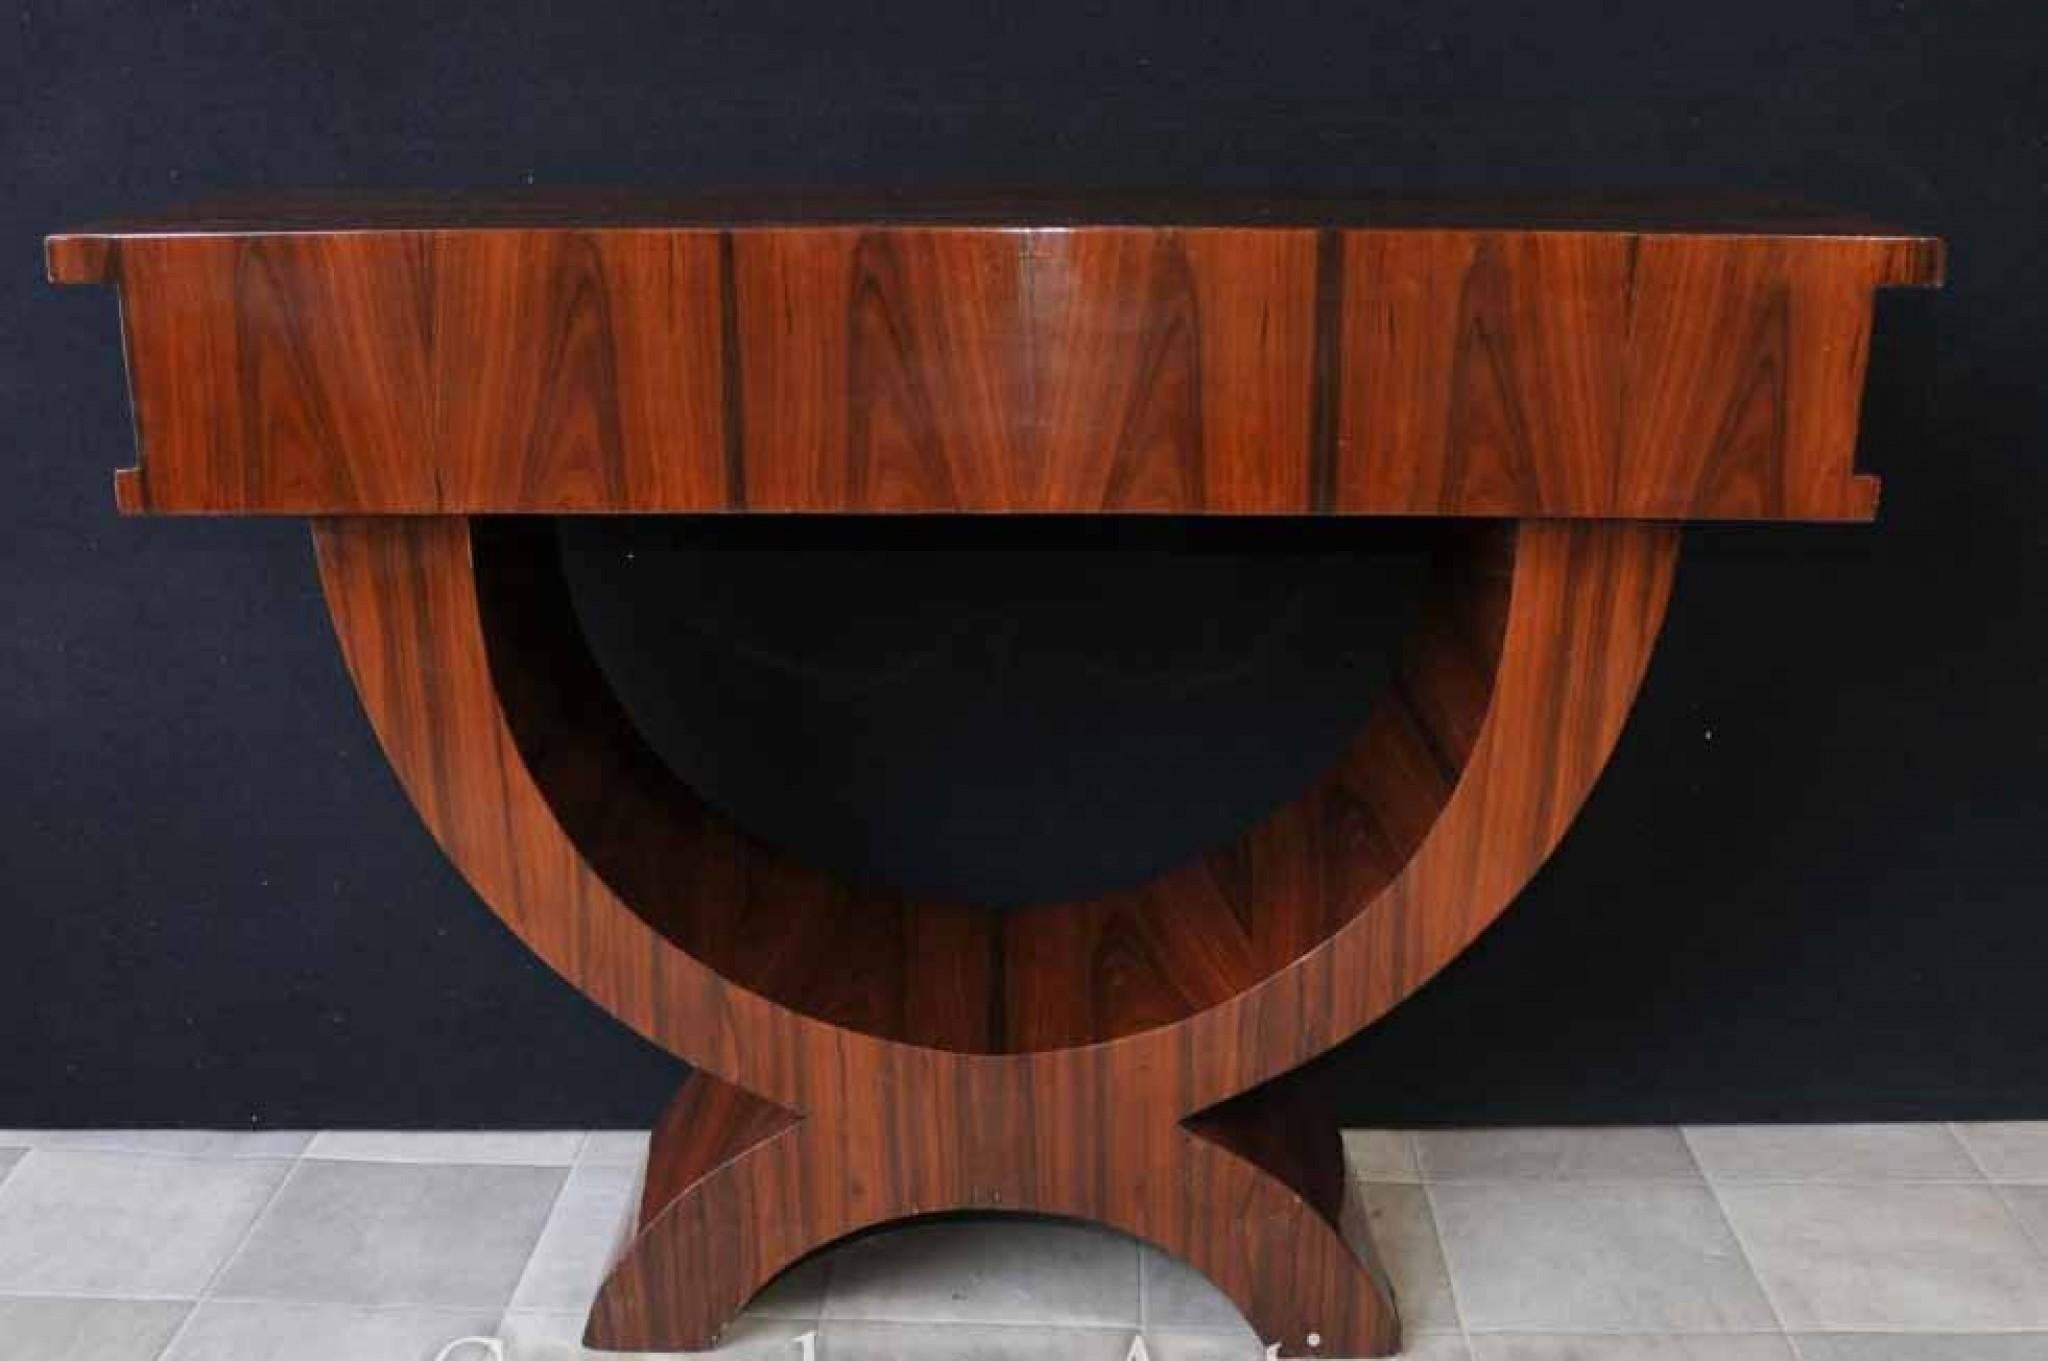 Marvellous art deco style console table in rosewood
Clean and minimal design captures the very essence of the 1920s
Single drawer to the front for storage
We have a large range of other art deco furniture available so please let us know if you